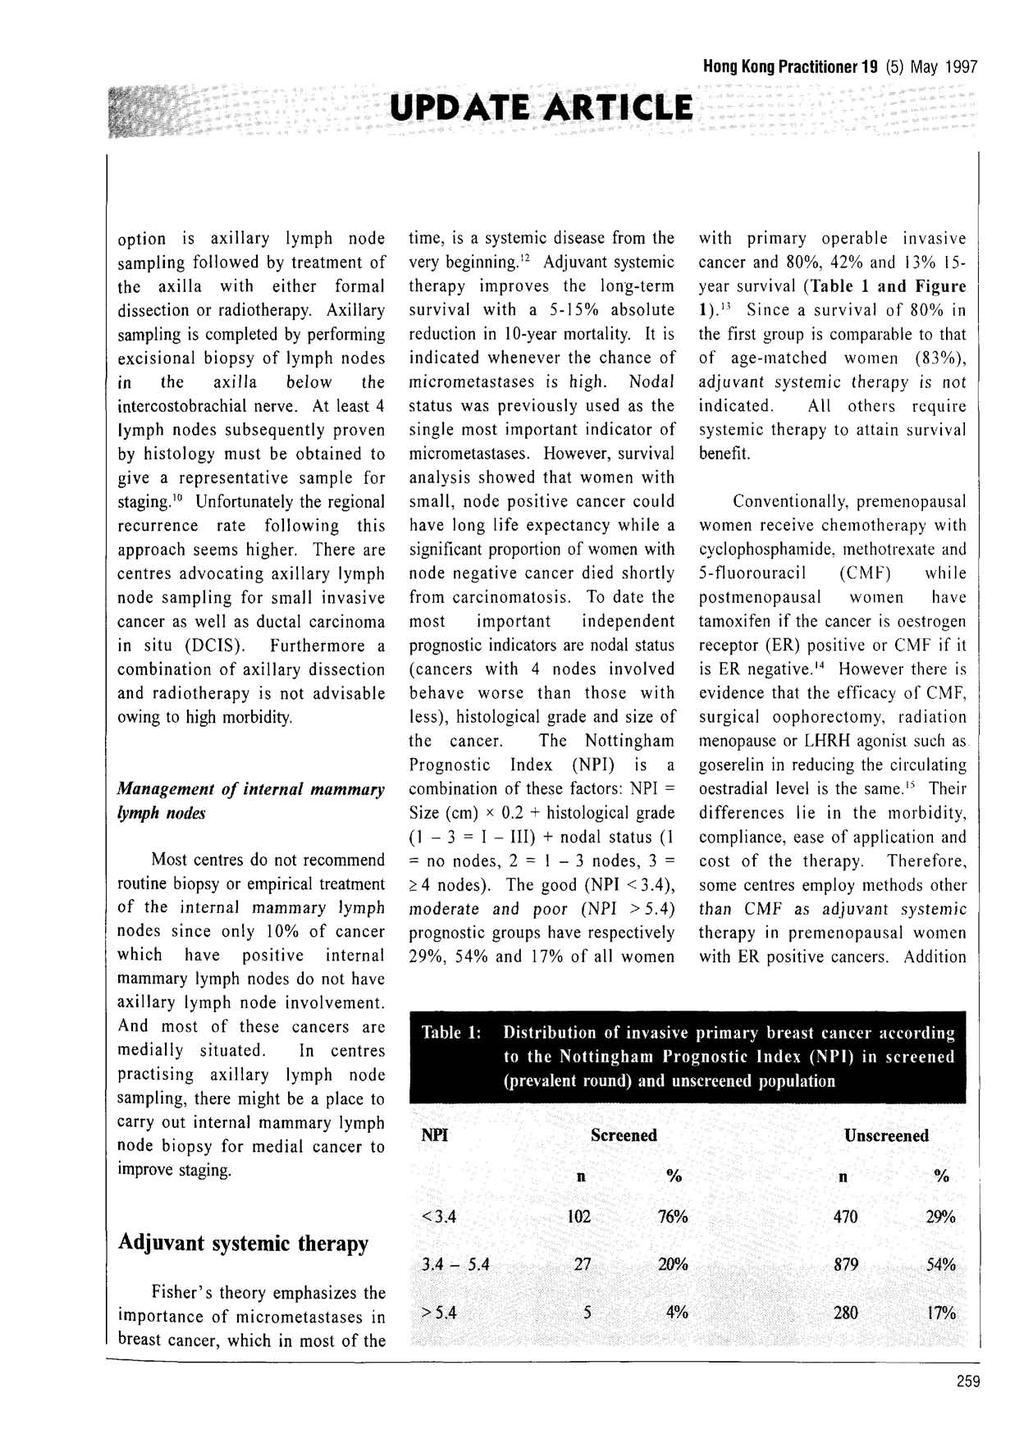 UPDATE ARTICLE Hong Kong Practitioner 19 (5) May 1997 option is axillary lymph node sampling followed by treatment of the axilla with either formal dissection or radiotherapy.